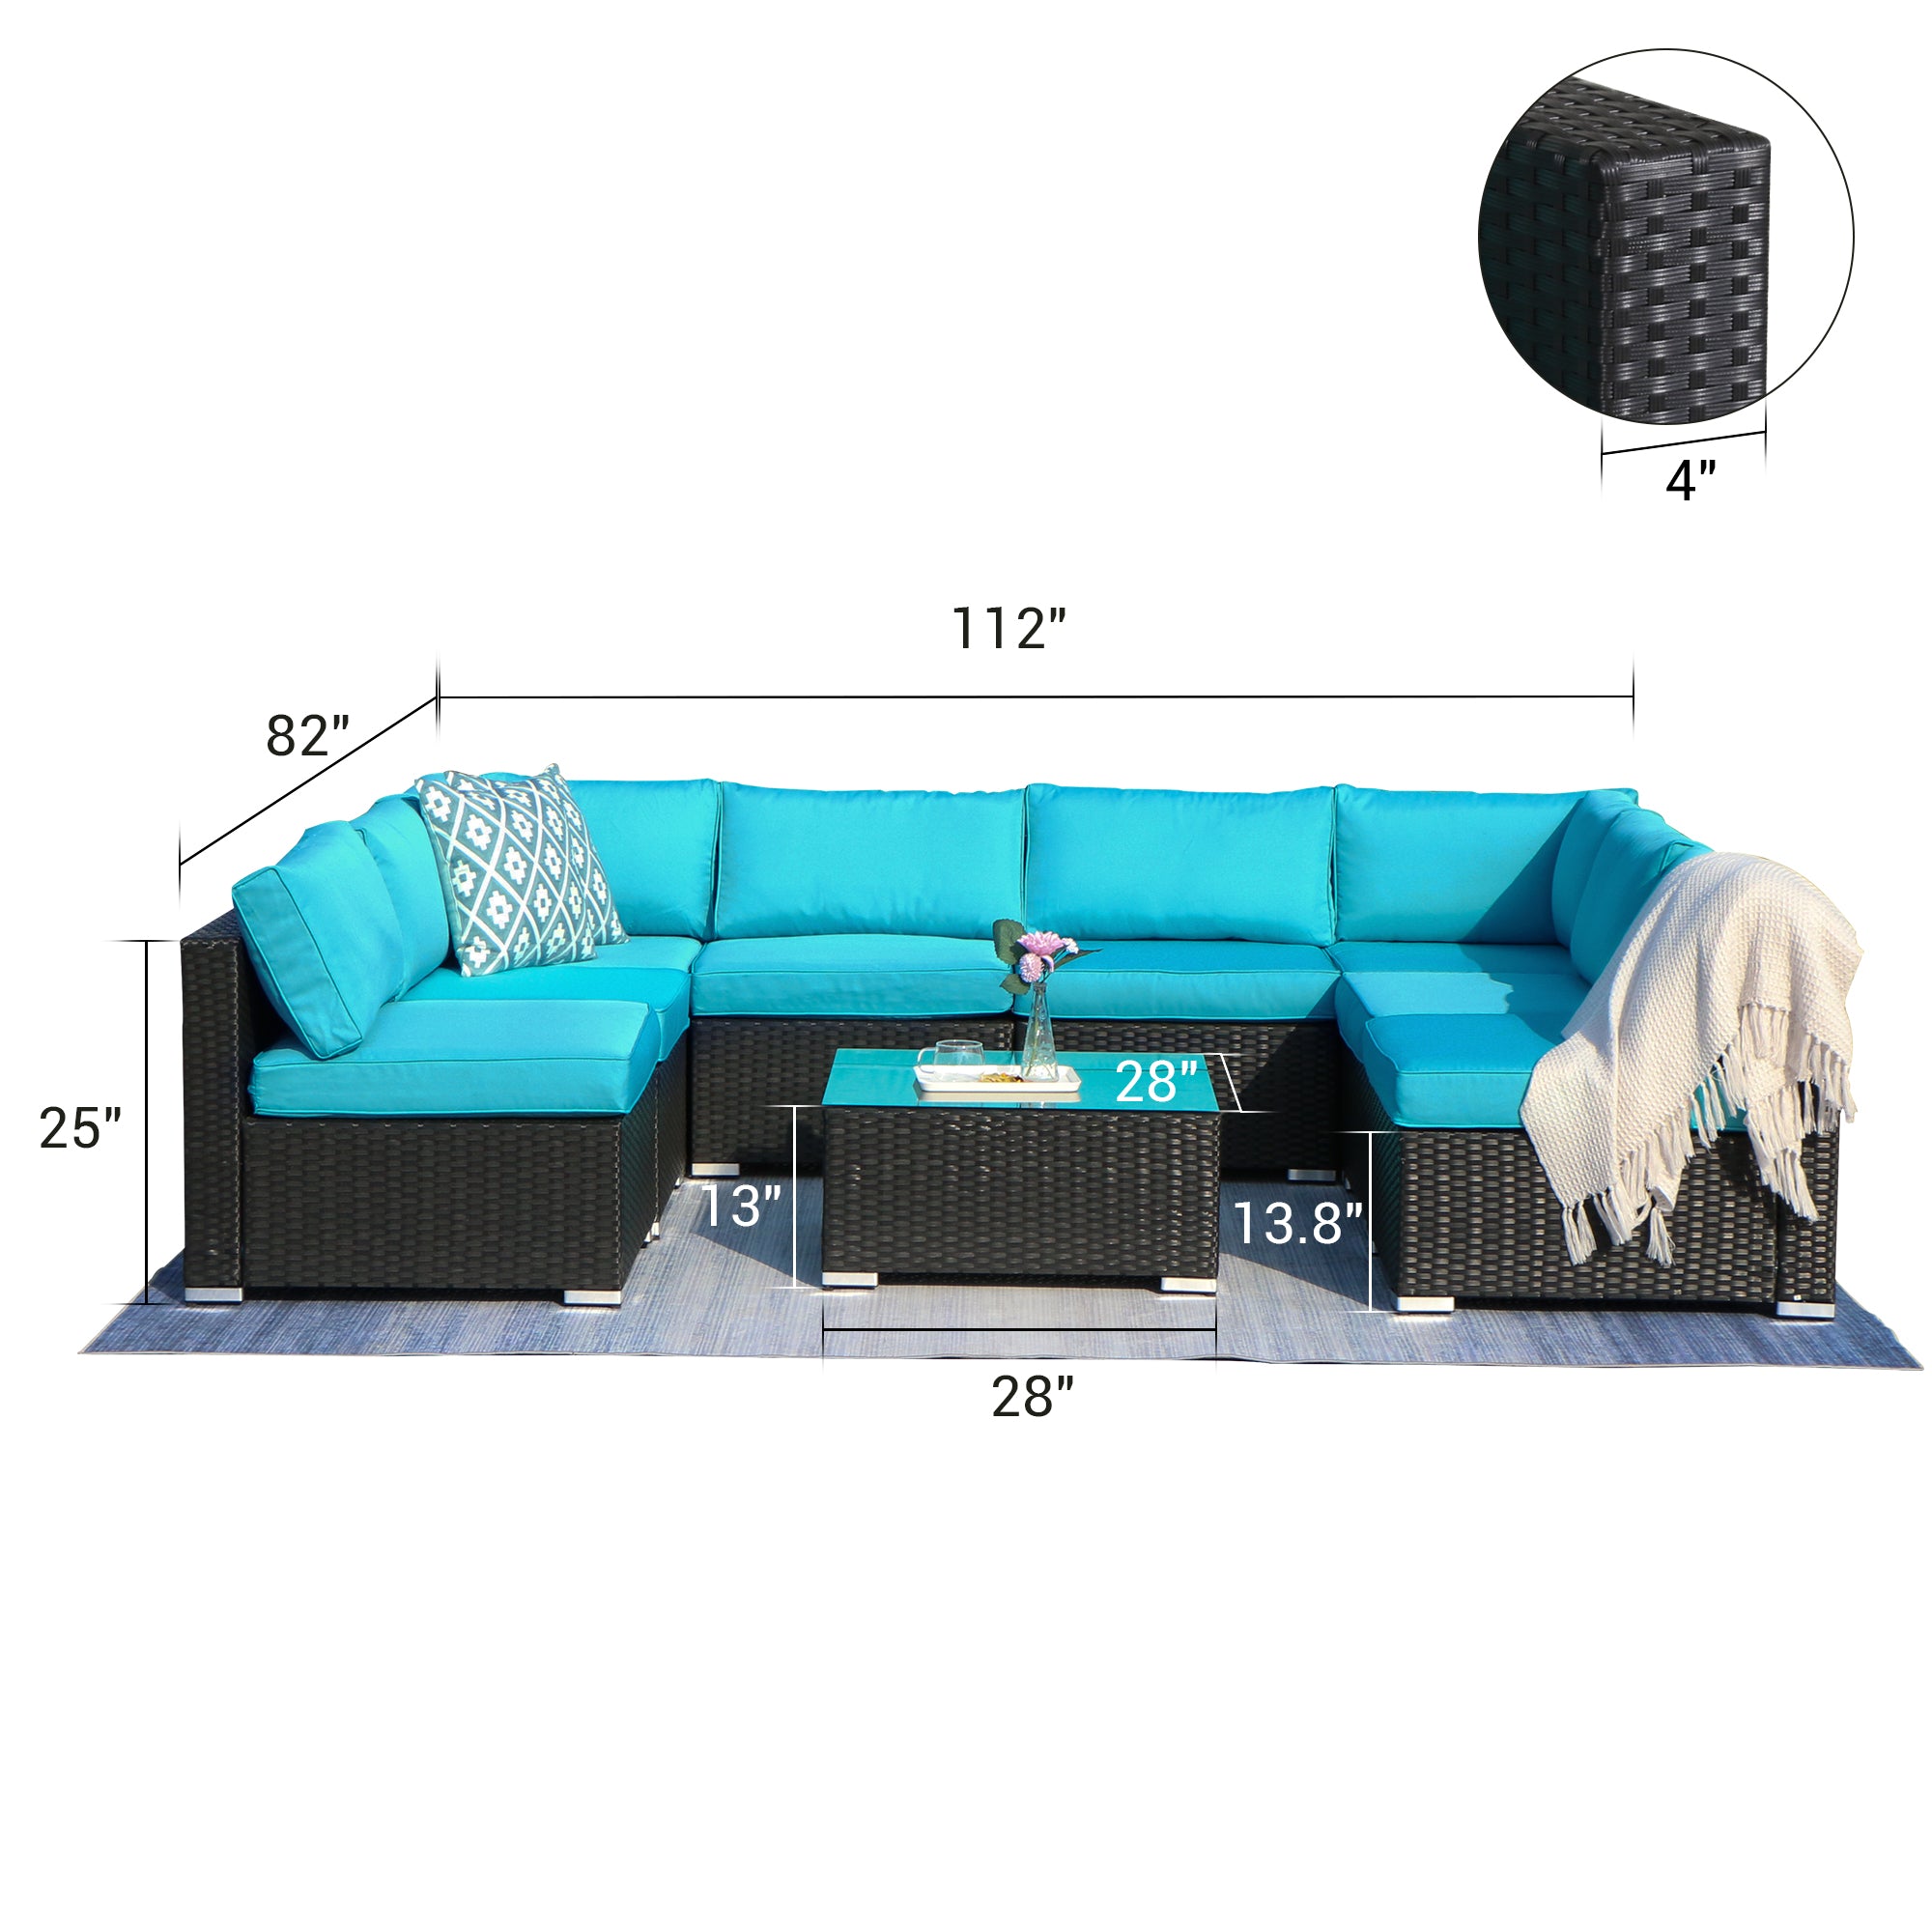 9 Piece Rattan Conversation Set with Coffee Table, Turquoise Cushions